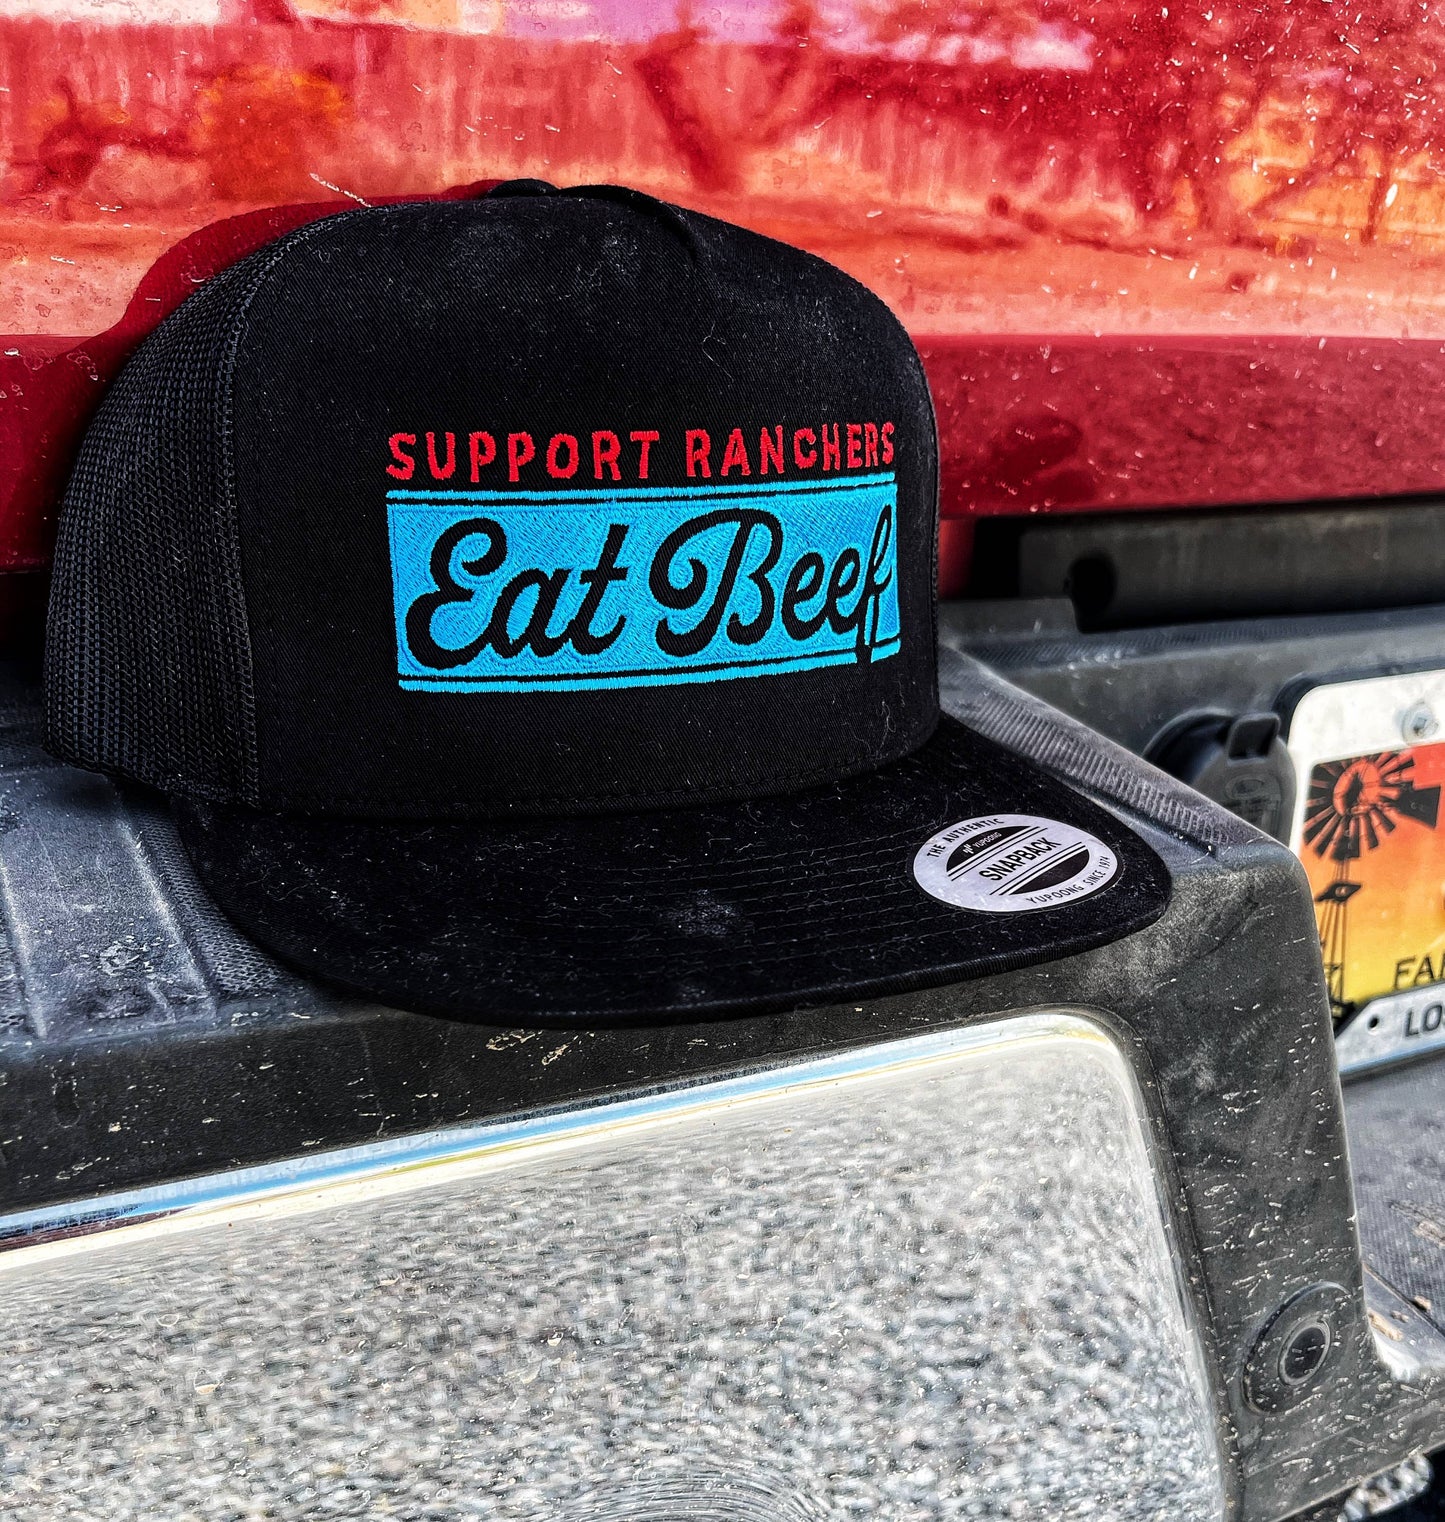 Support ranchers eat beef hat black